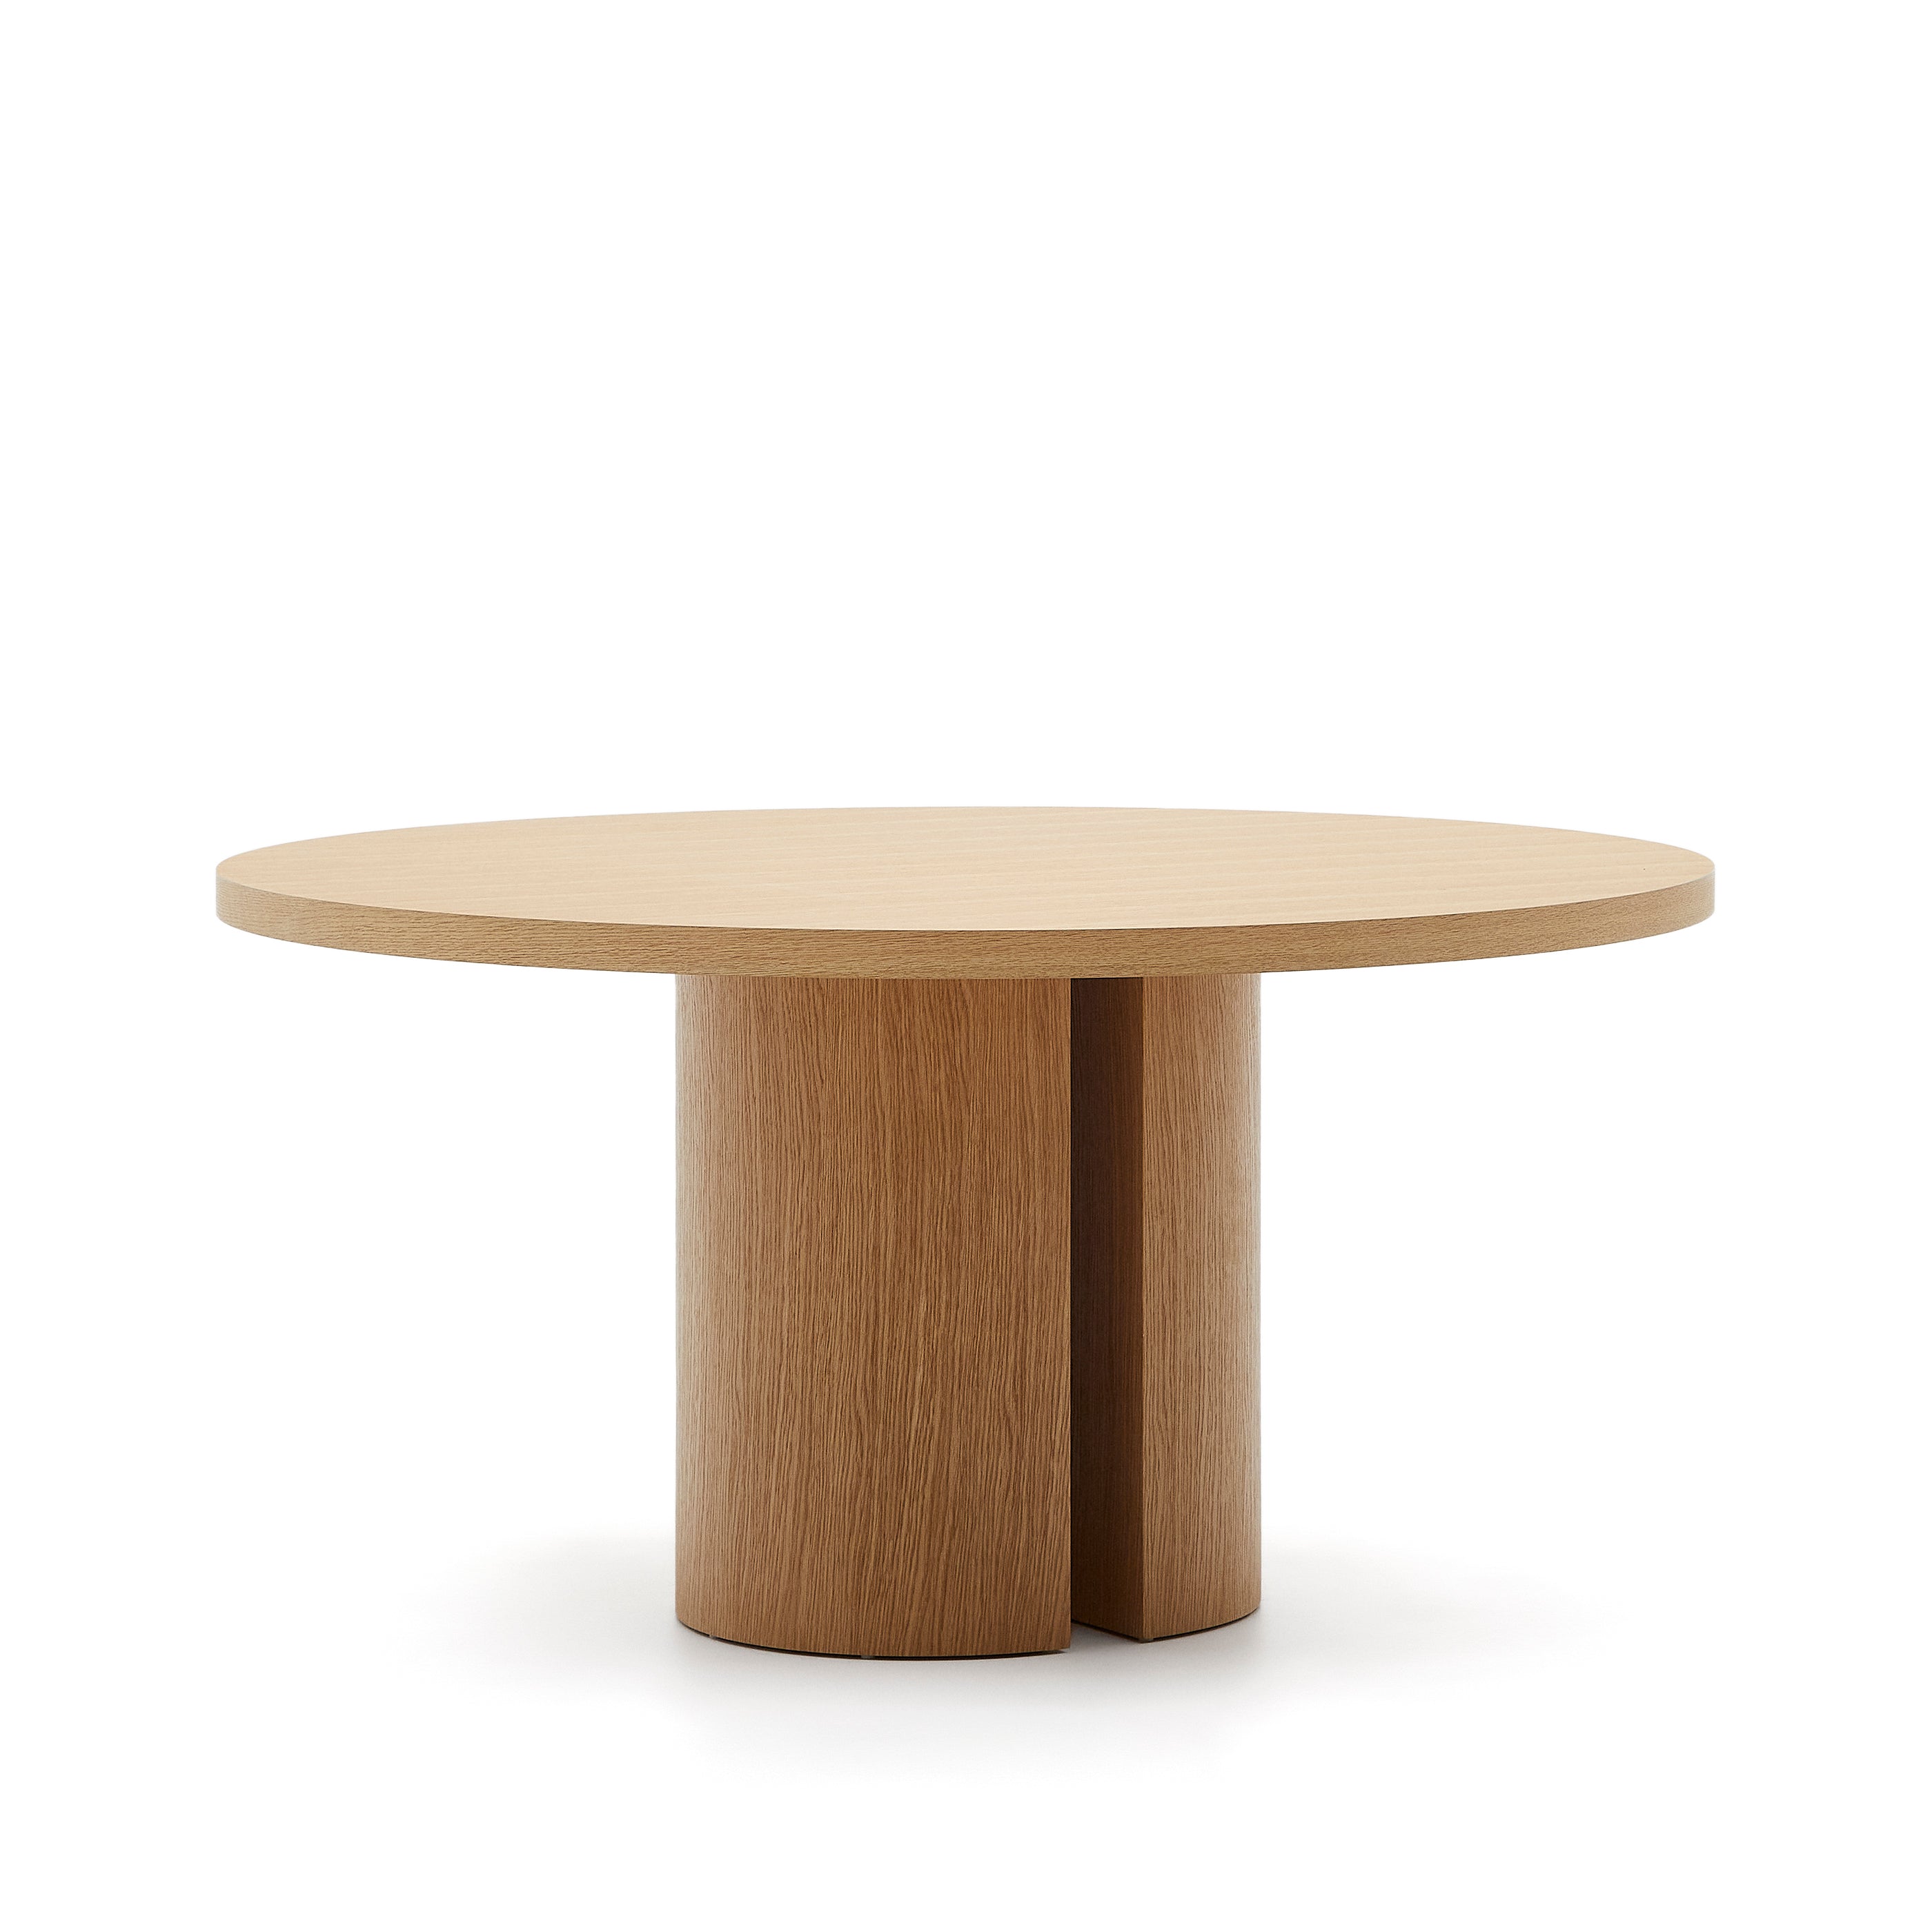 Nealy table with oak veneer with natural finish, Ø 150 cm